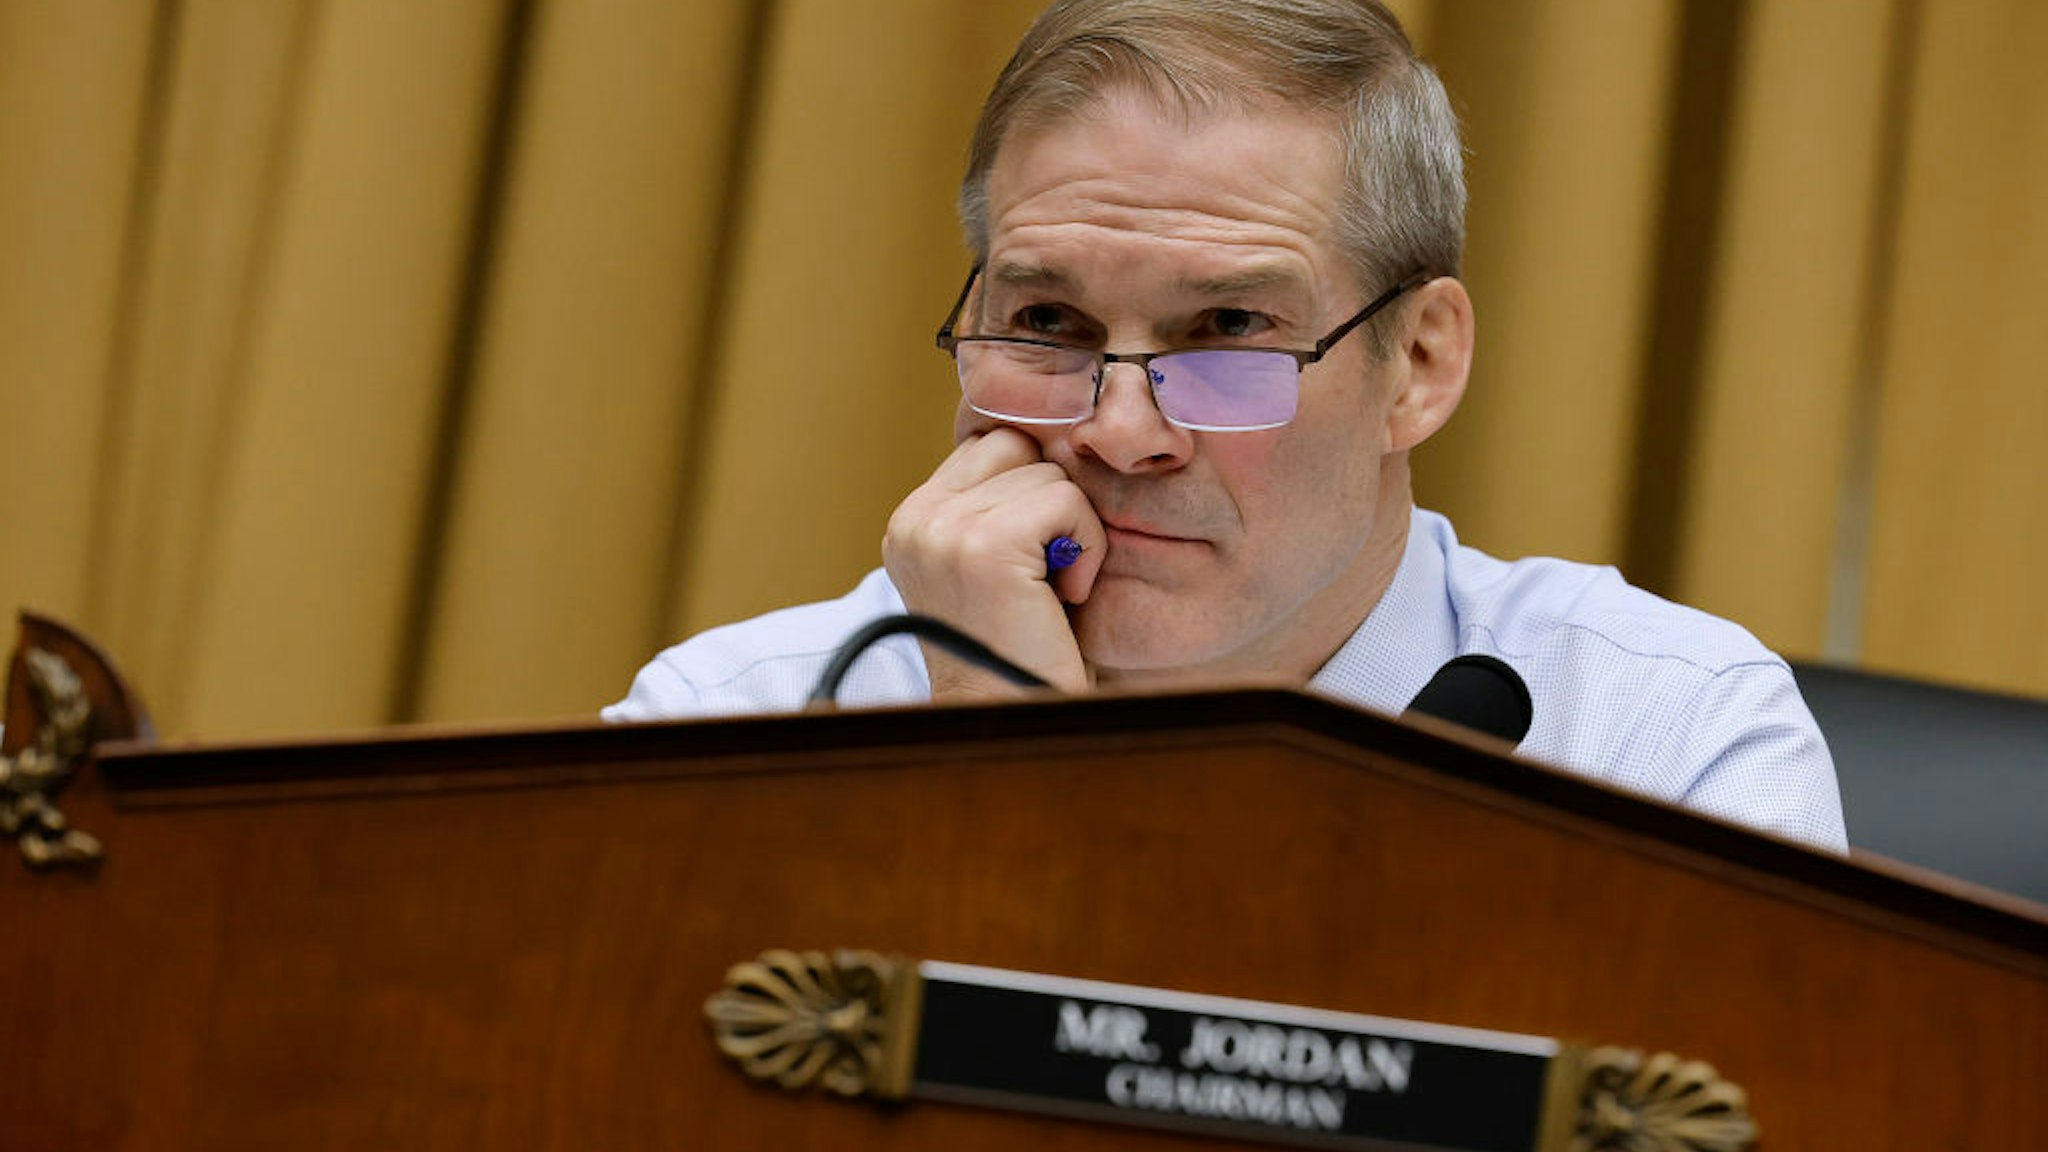 WASHINGTON, DC - FEBRUARY 09: House Judiciary Committee Chairman Jim Jordan (R-OH) presides over a hearing of the Weaponization of the Federal Government Subcommittee in the Rayburn House Office Building on Capitol Hill on February 09, 2023 in Washington, DC. This was the first hearing of the new subcommittee, created by a sharply divided Congress to scrutinize what Republican members have charged is an effort by the federal government to target and silence conservatives. (Photo by Chip Somodevilla/Getty Images)